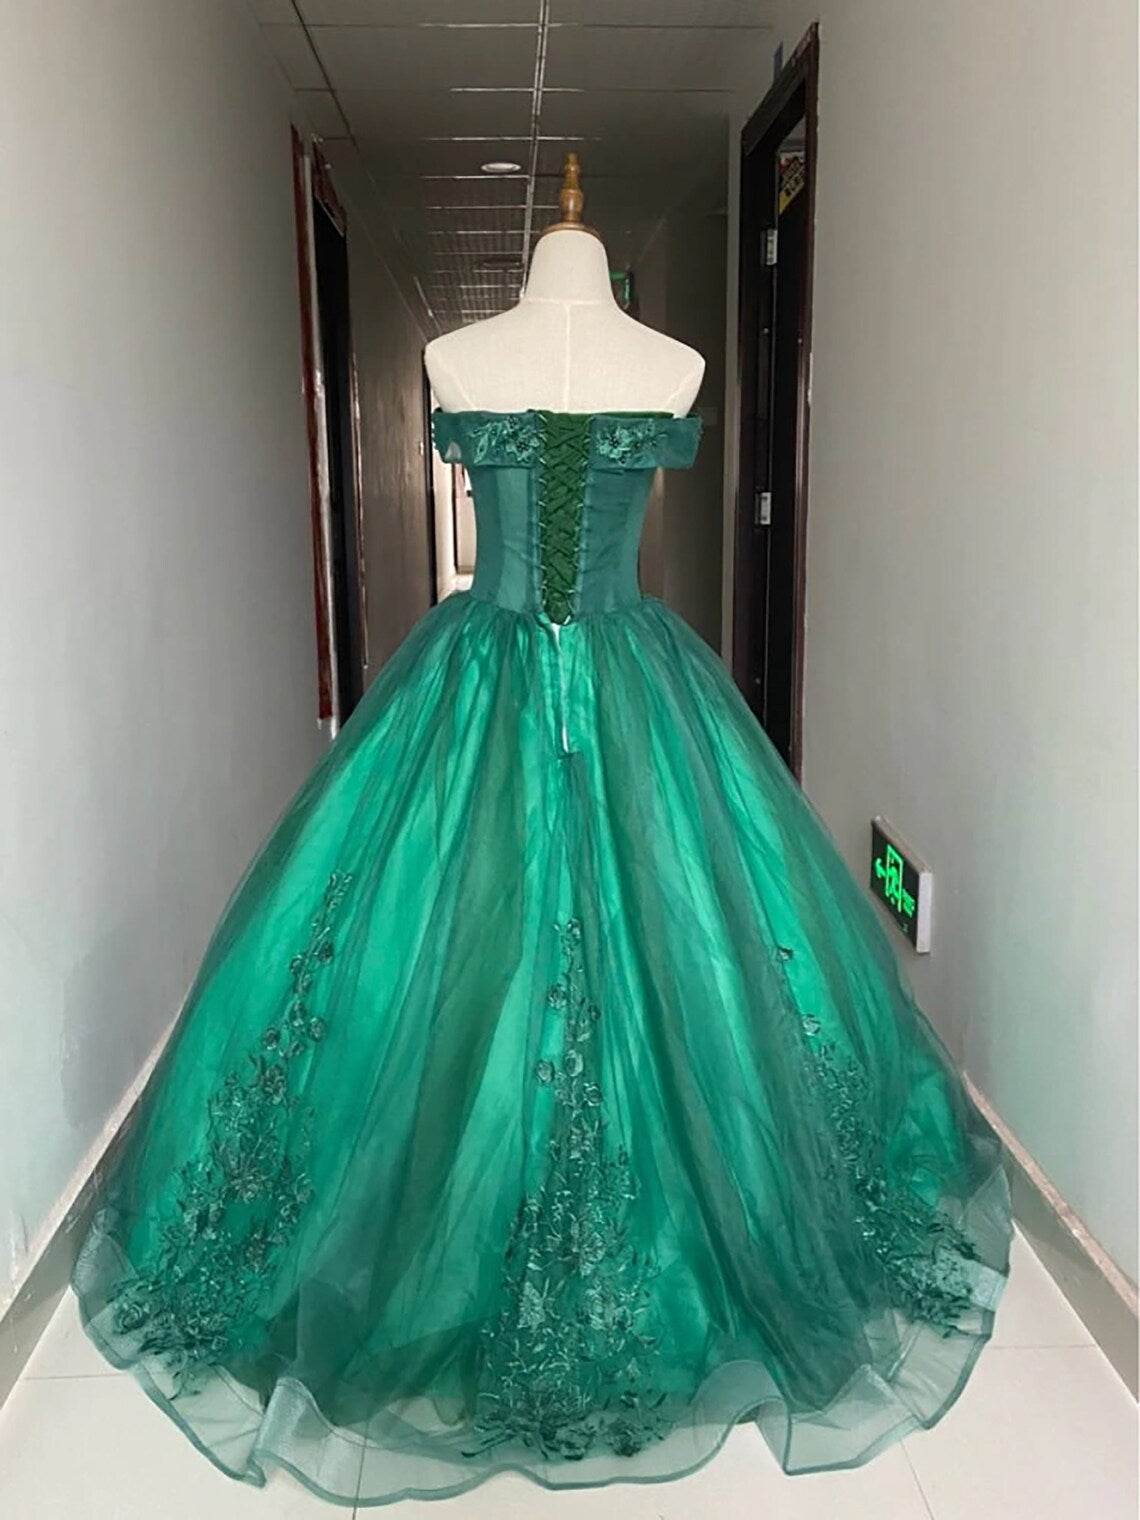 Prom Dresses Country, Green Ball Gown Tulle Off Shoulder with Lace Applique, Green Sweet 16 Dress Party Dress